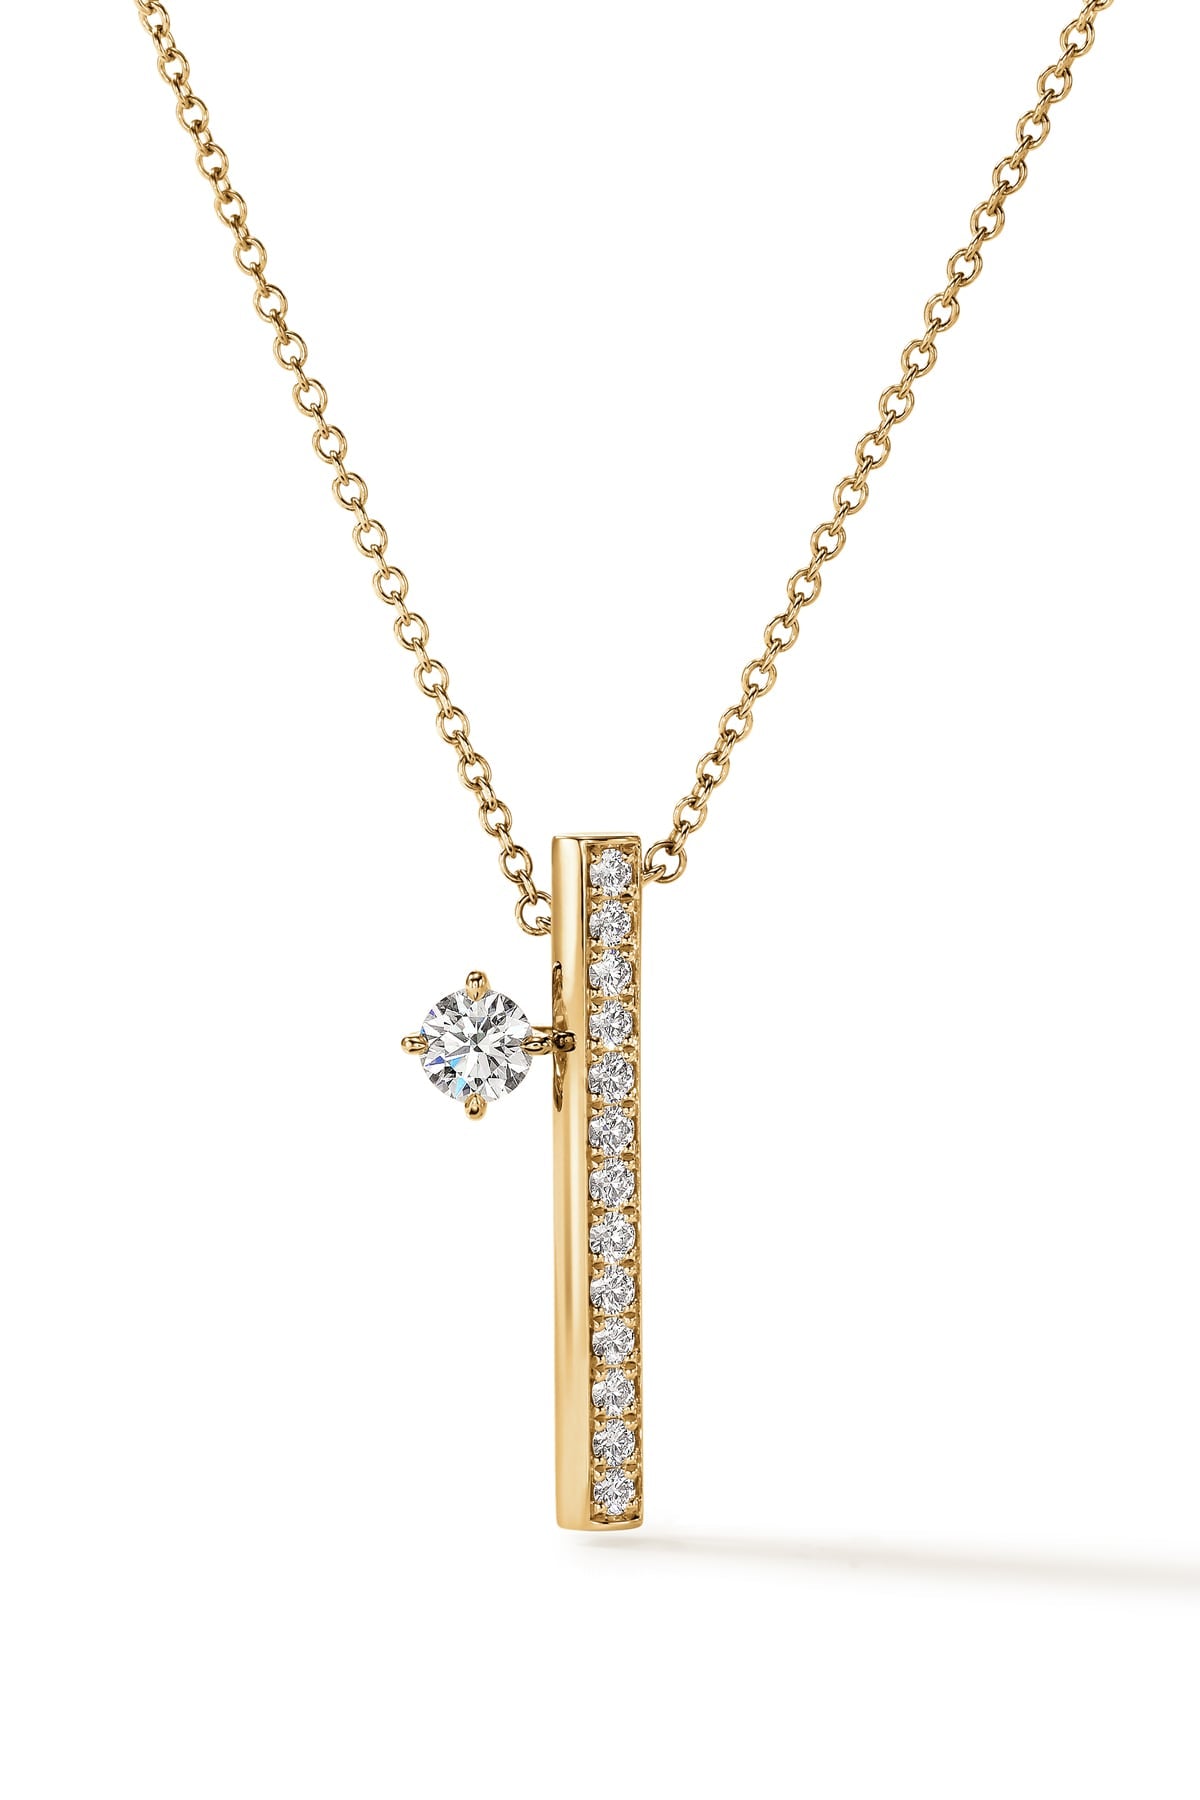 Barre Floating Single Diamond Pave Pendant Necklace from Hearts On Fire from LeGassick Jewellery Gold Coast, Australia.